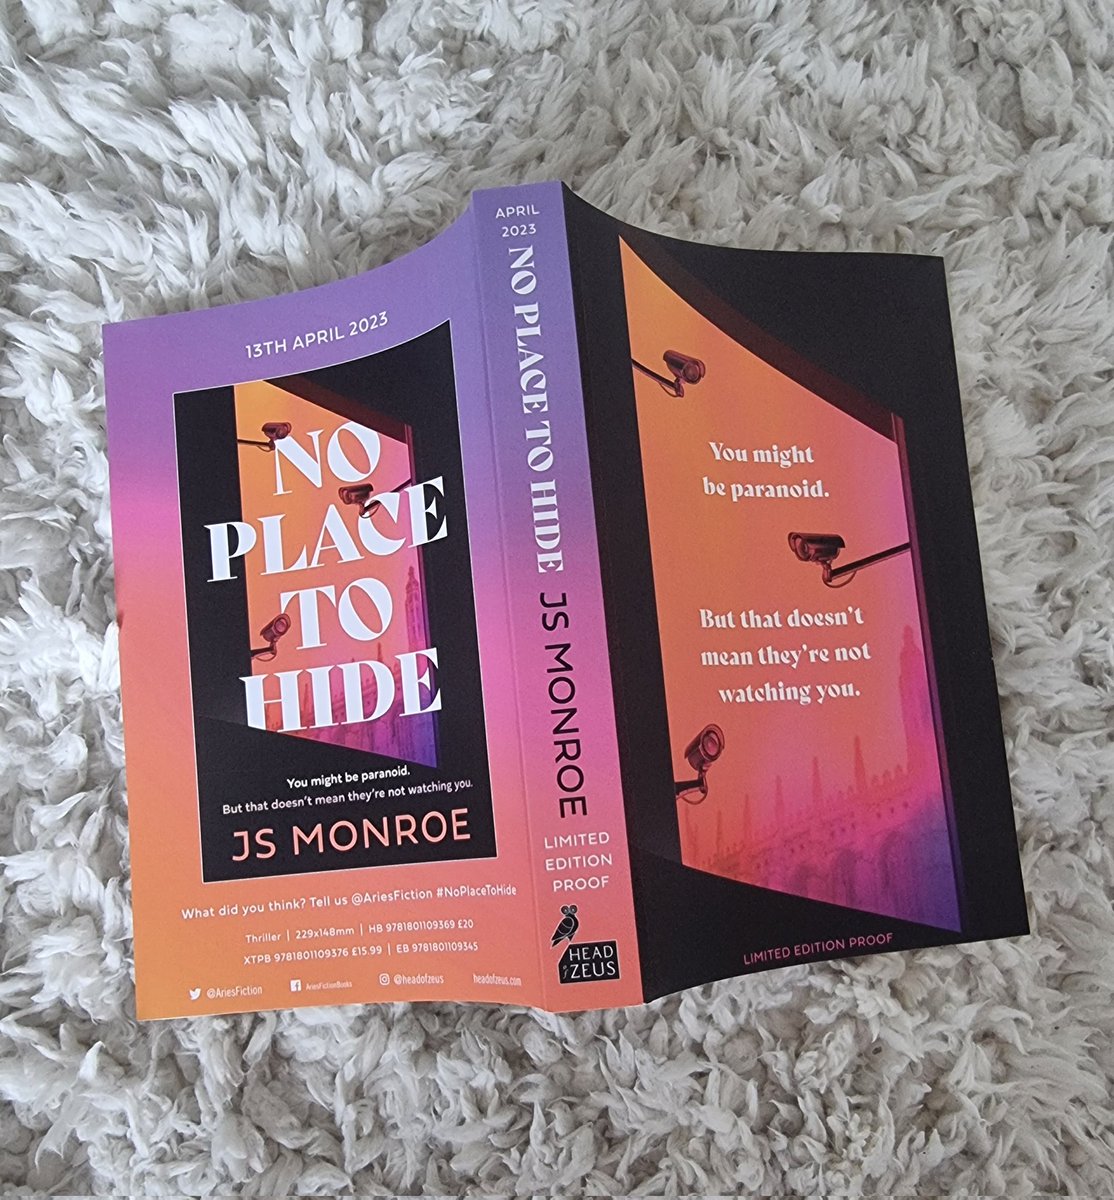 Exciting #bookpost today!

'You might be paranoid. But that doesn't mean they're not watching you.'

#NoPlaceToHide  @JSThrillers is published on 13th April.
I can't wait to read this!

@AriesFiction #books #bookbloggers #booktwitter